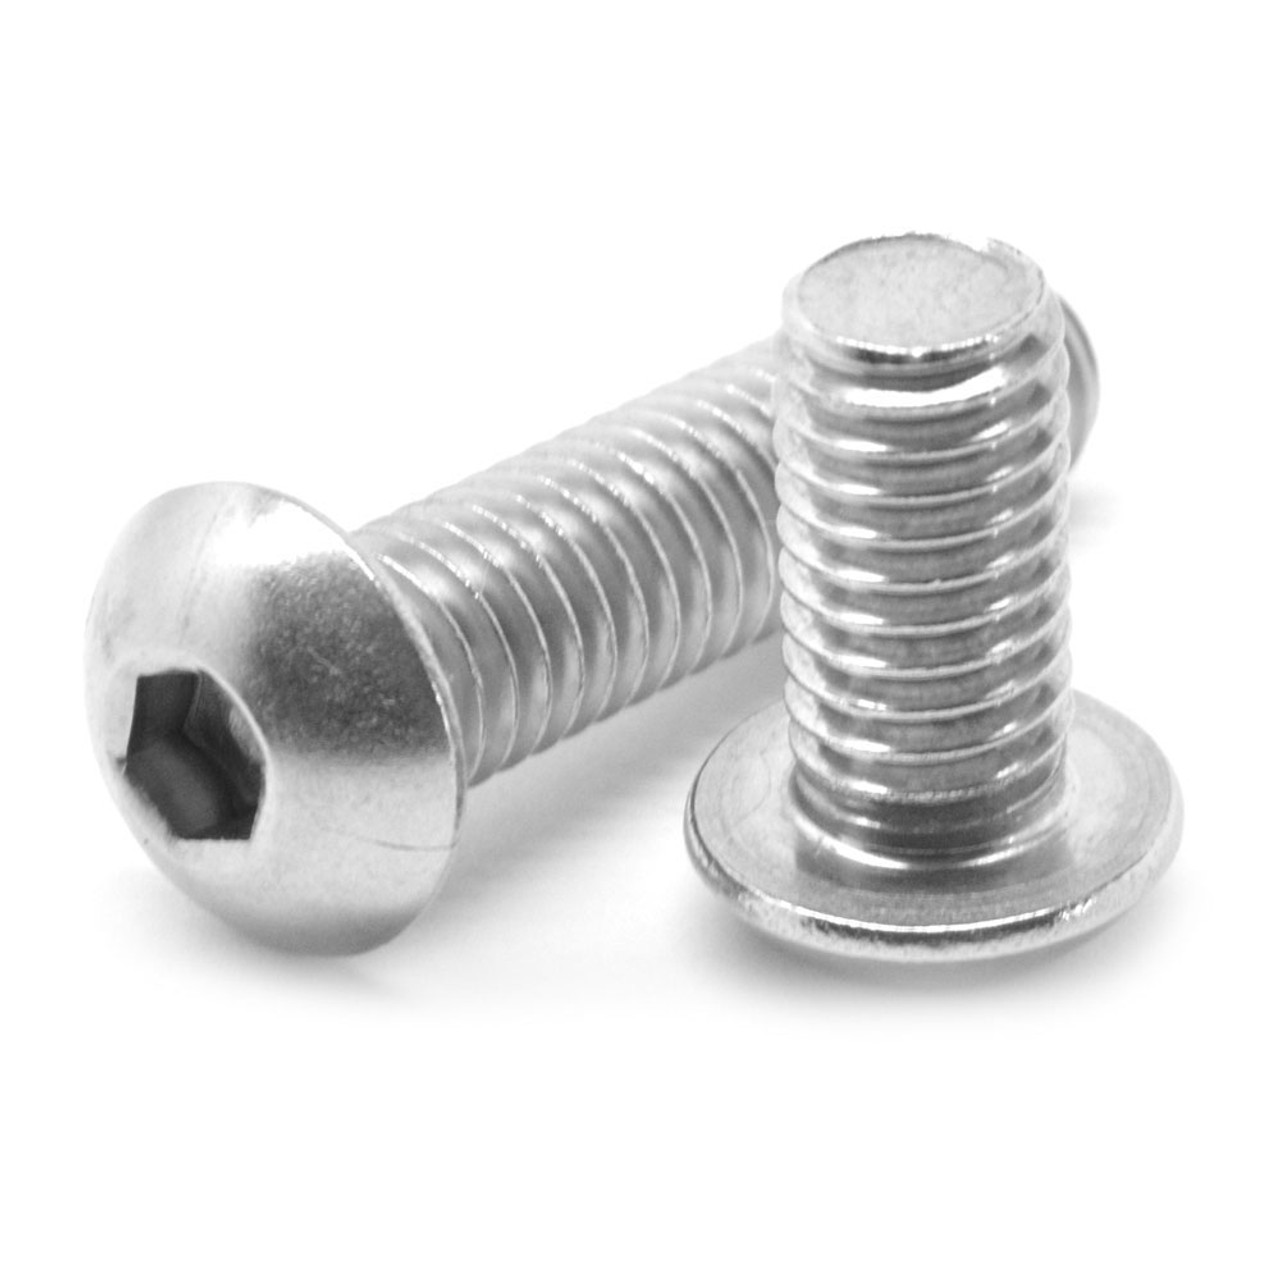 M3 x 0.50 x 25 MM (FT) Coarse Thread ISO 7380 Socket Button Head Cap Screw Stainless Steel 18-8